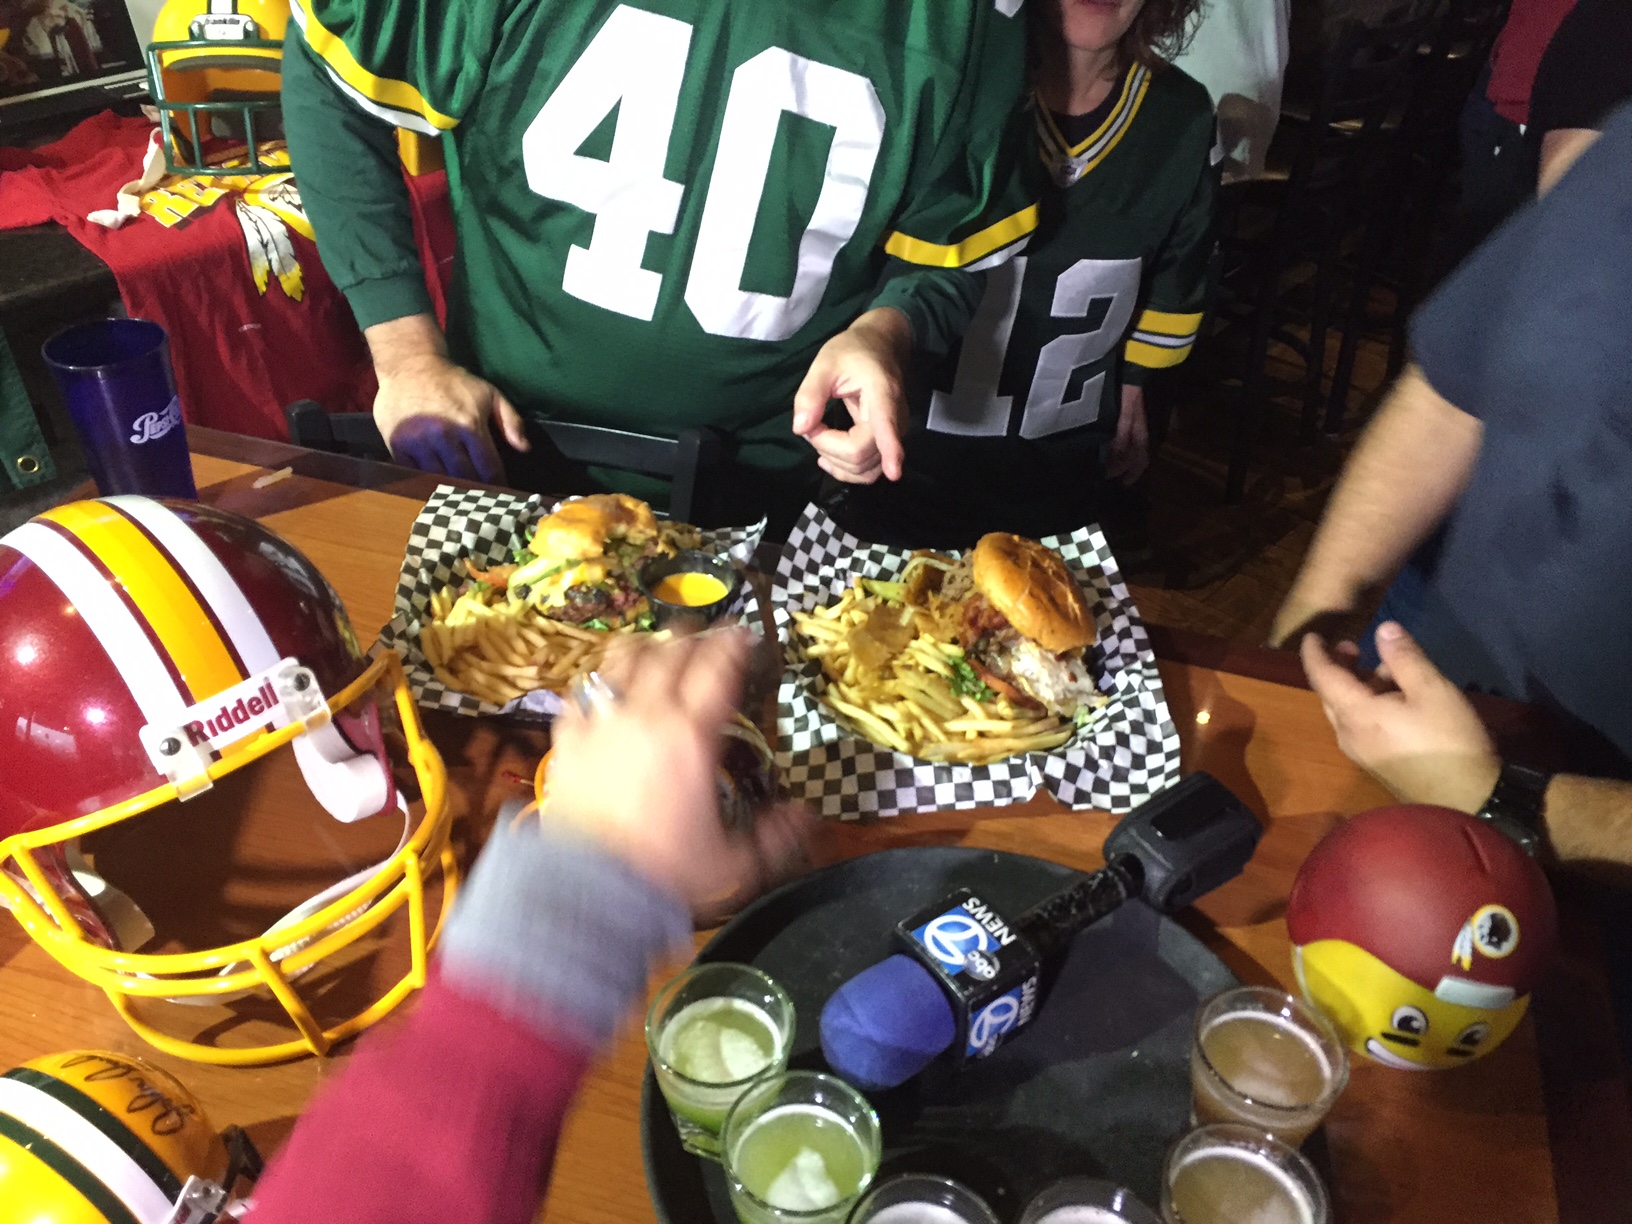 Bars and restaurants with large screens will offer a chance to see the game and socialize. (WTOP/Neal Augenstein)